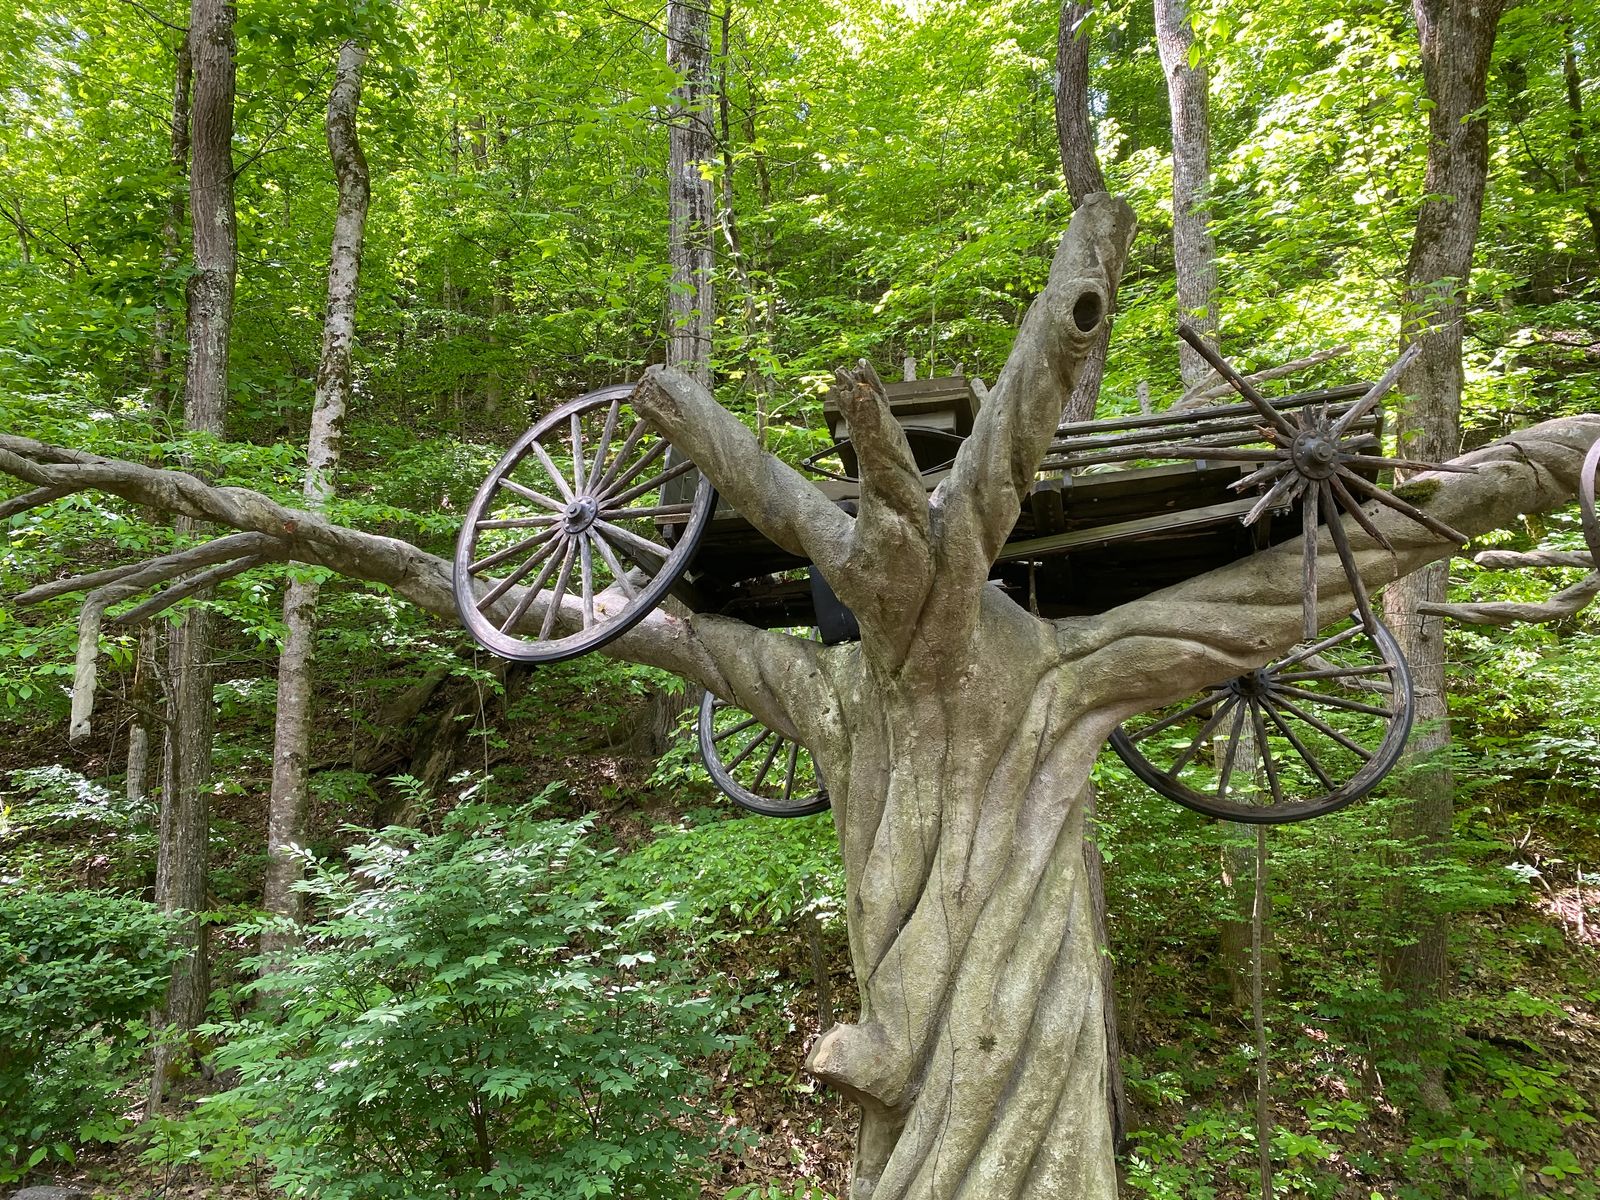 1800's wooden carriage or cart in a tree with one of the wheels broken, Guide to Dollywood